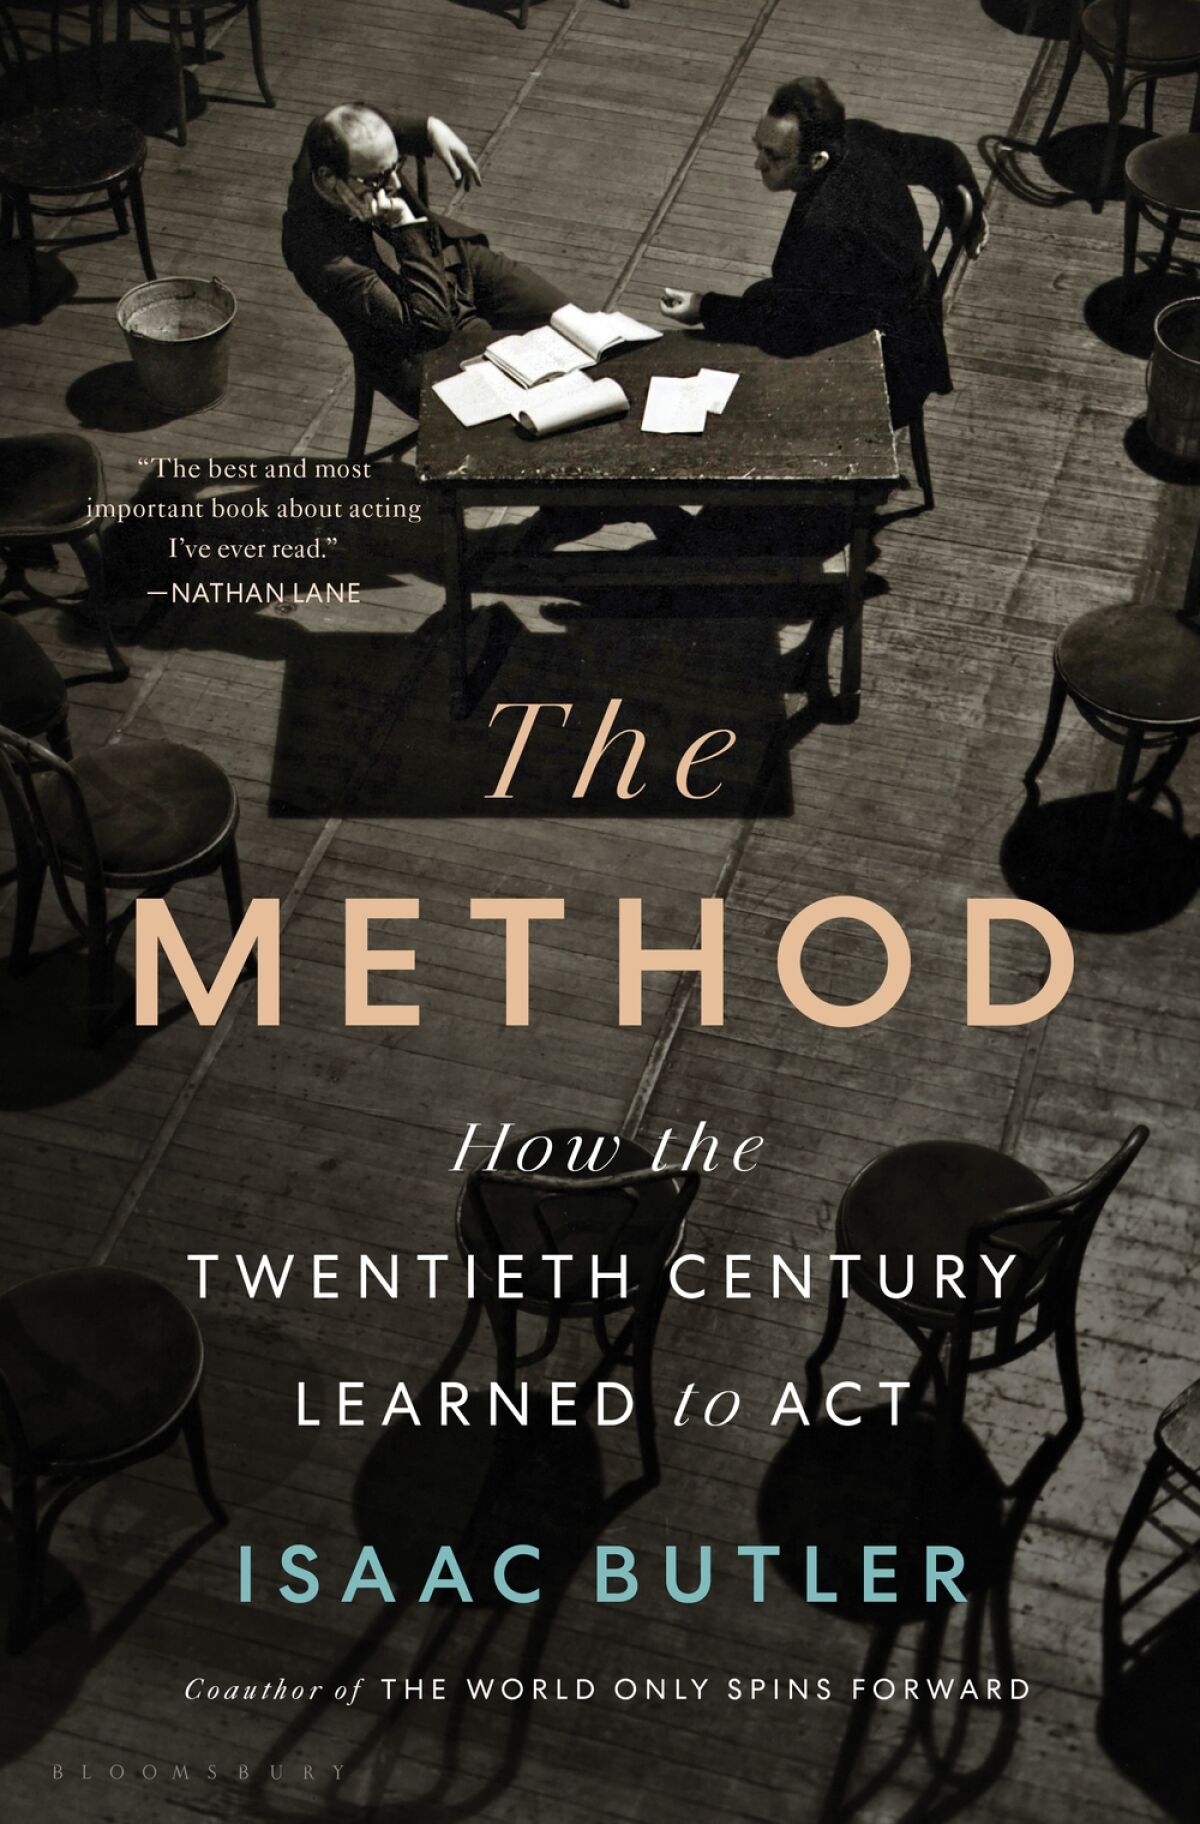 "The Method: How the Twentieth Century Learned to Act," by Isaac Butler